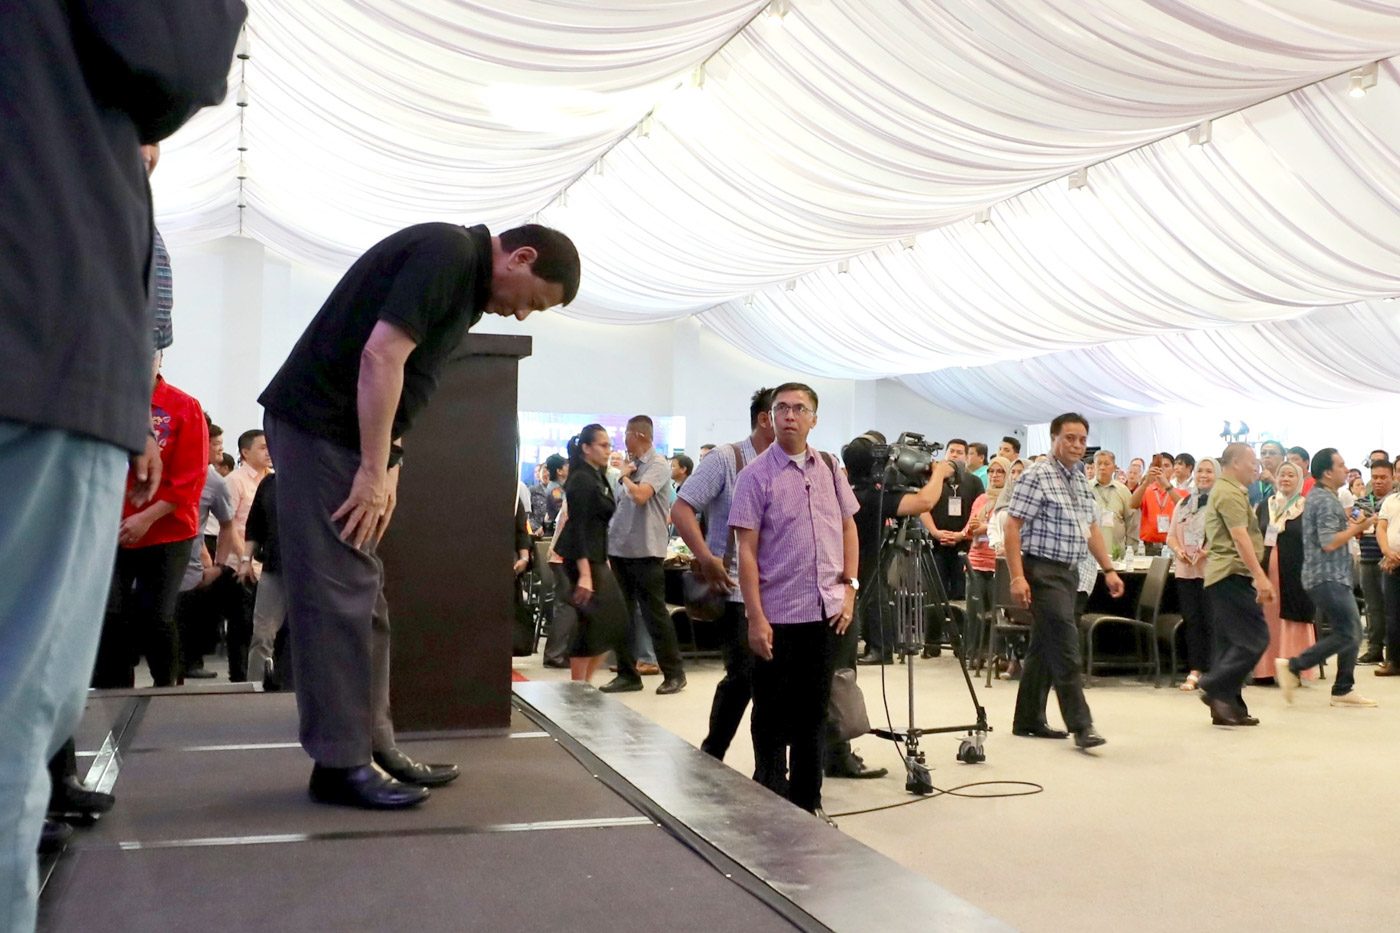 FORMER LOCAL OFFICIAL. President Rodrigo Roa Duterte shows a gesture of respect as he takes center stage during the 25th Annual National Convention of the Vice Mayors' League of the Philippines on June 28, 2018. Malacañang photo 